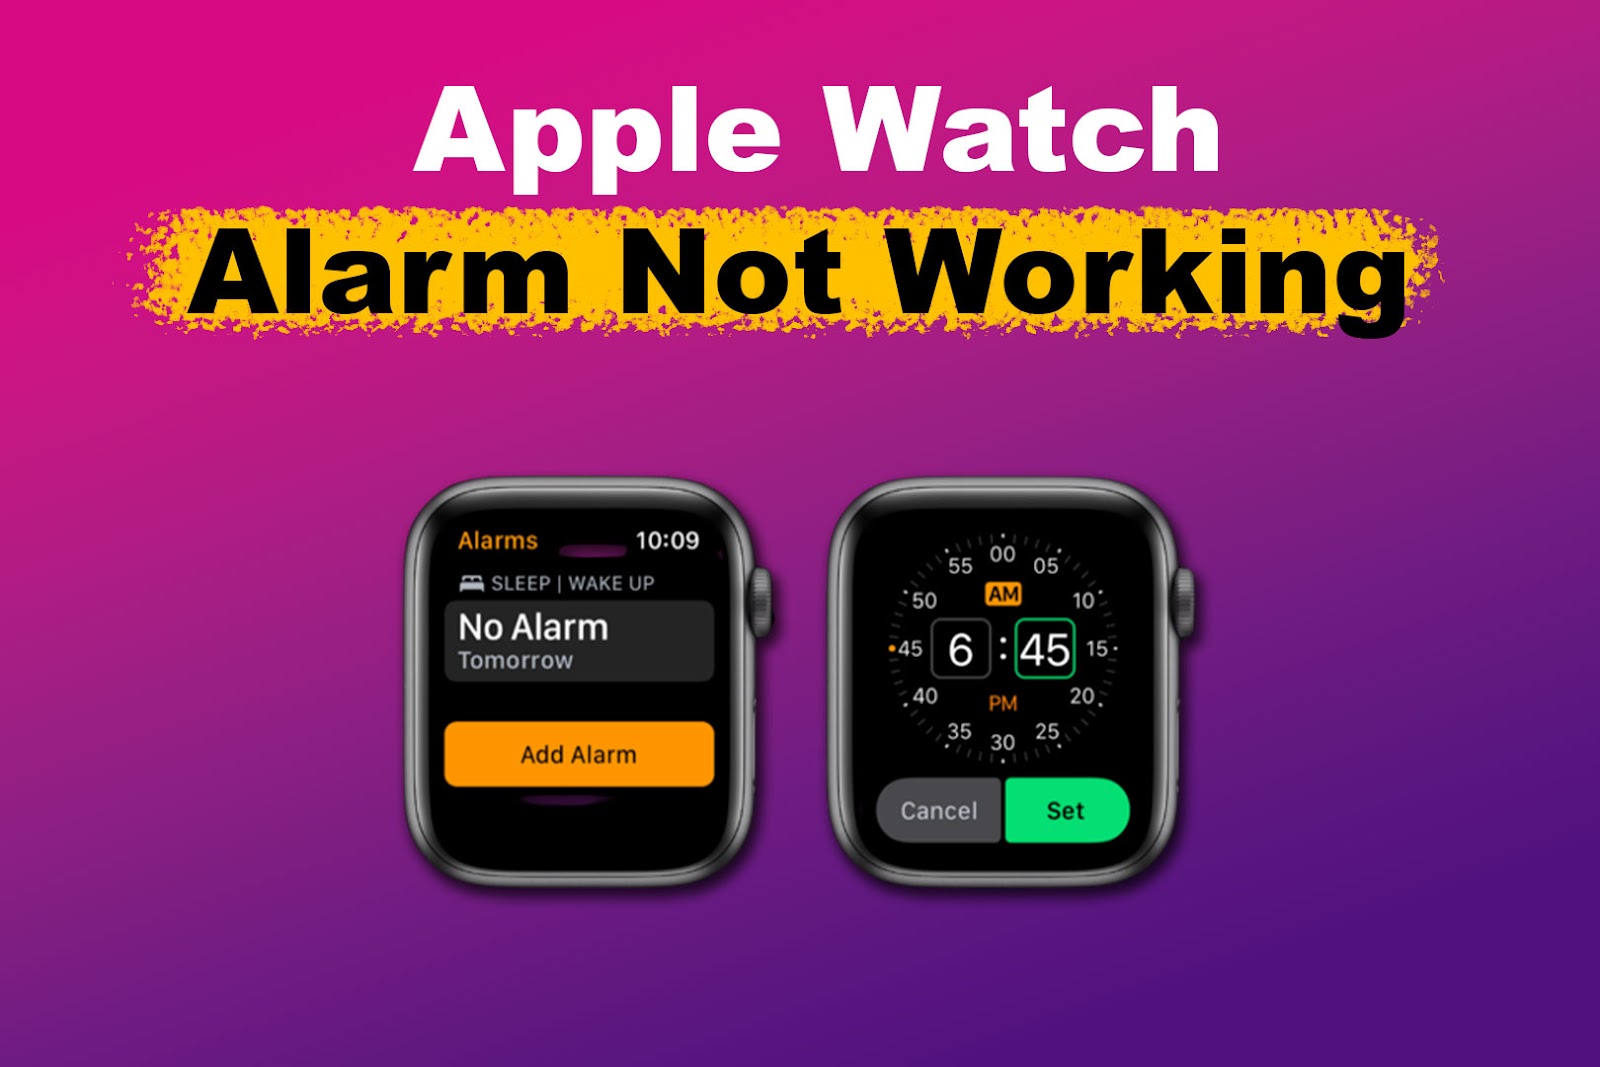 Apple Watch Alarm Not Working? [Do This to Fix It]